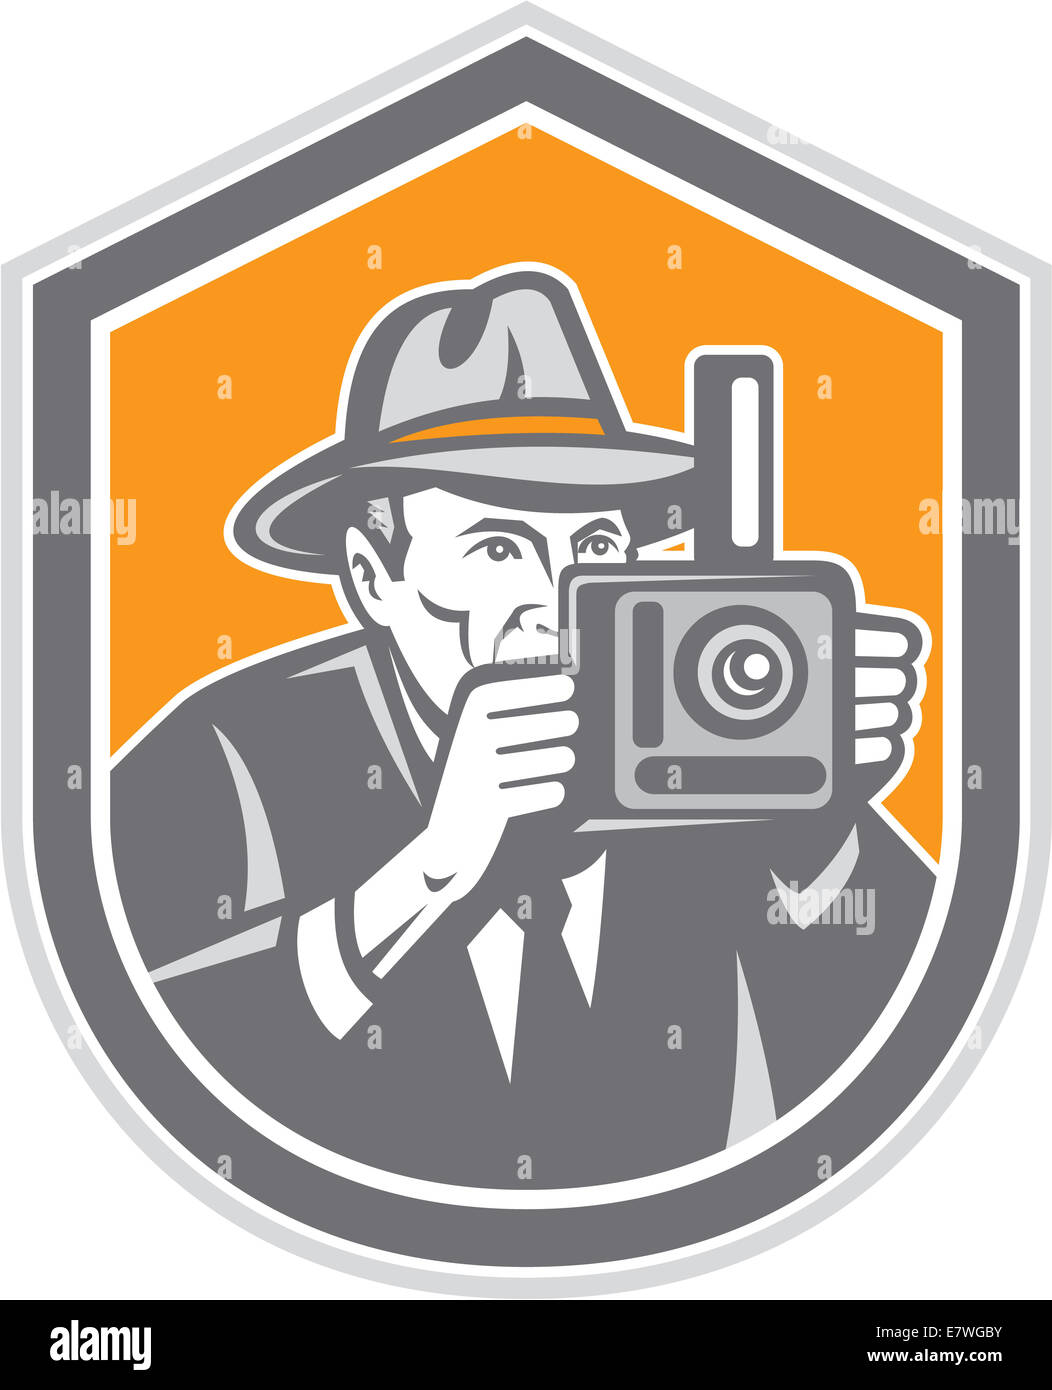 Illustration of a photographer wearing fedora hat shooting with vintage bellows camera set inside shield crest on isolated background done in retro style. Stock Photo